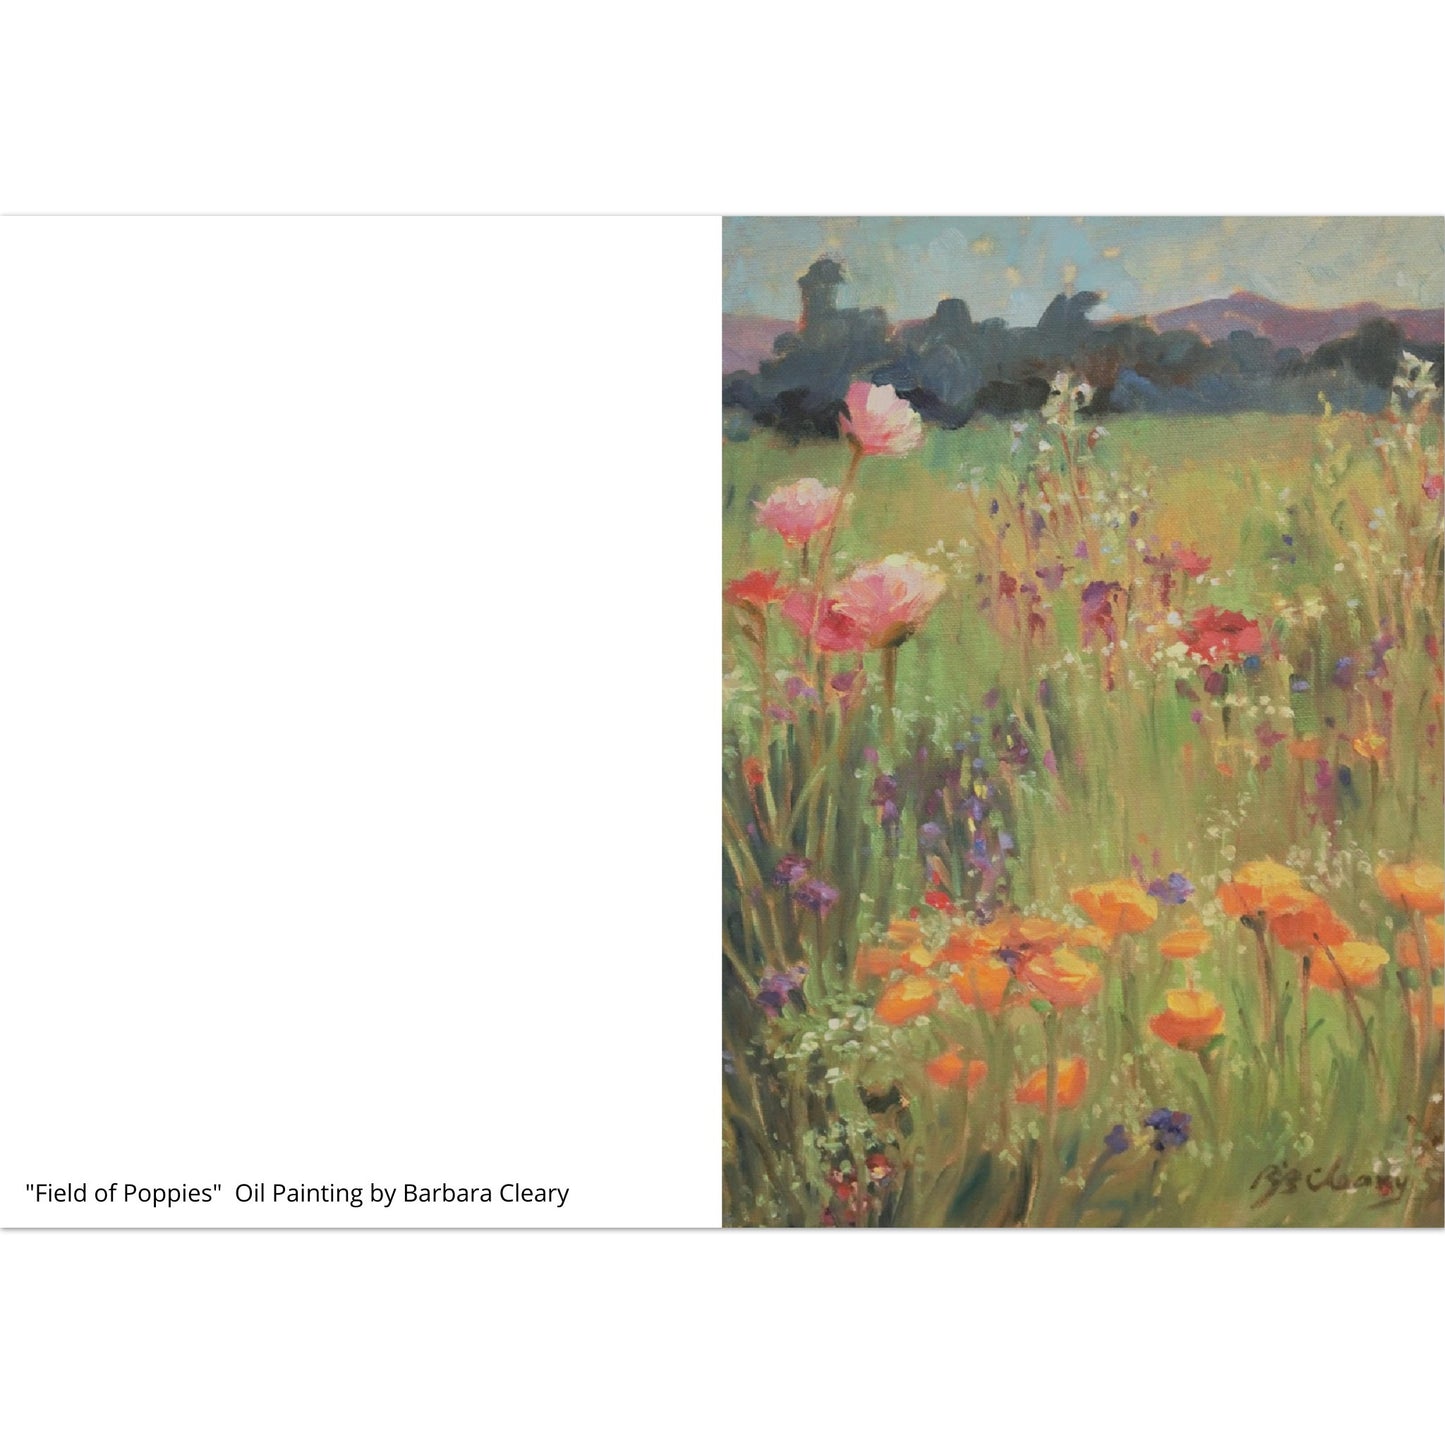 "Field of Poppies" Pack of 10 Greeting Cards (standard envelopes) (US & CA) by Barbara Cleary Designs